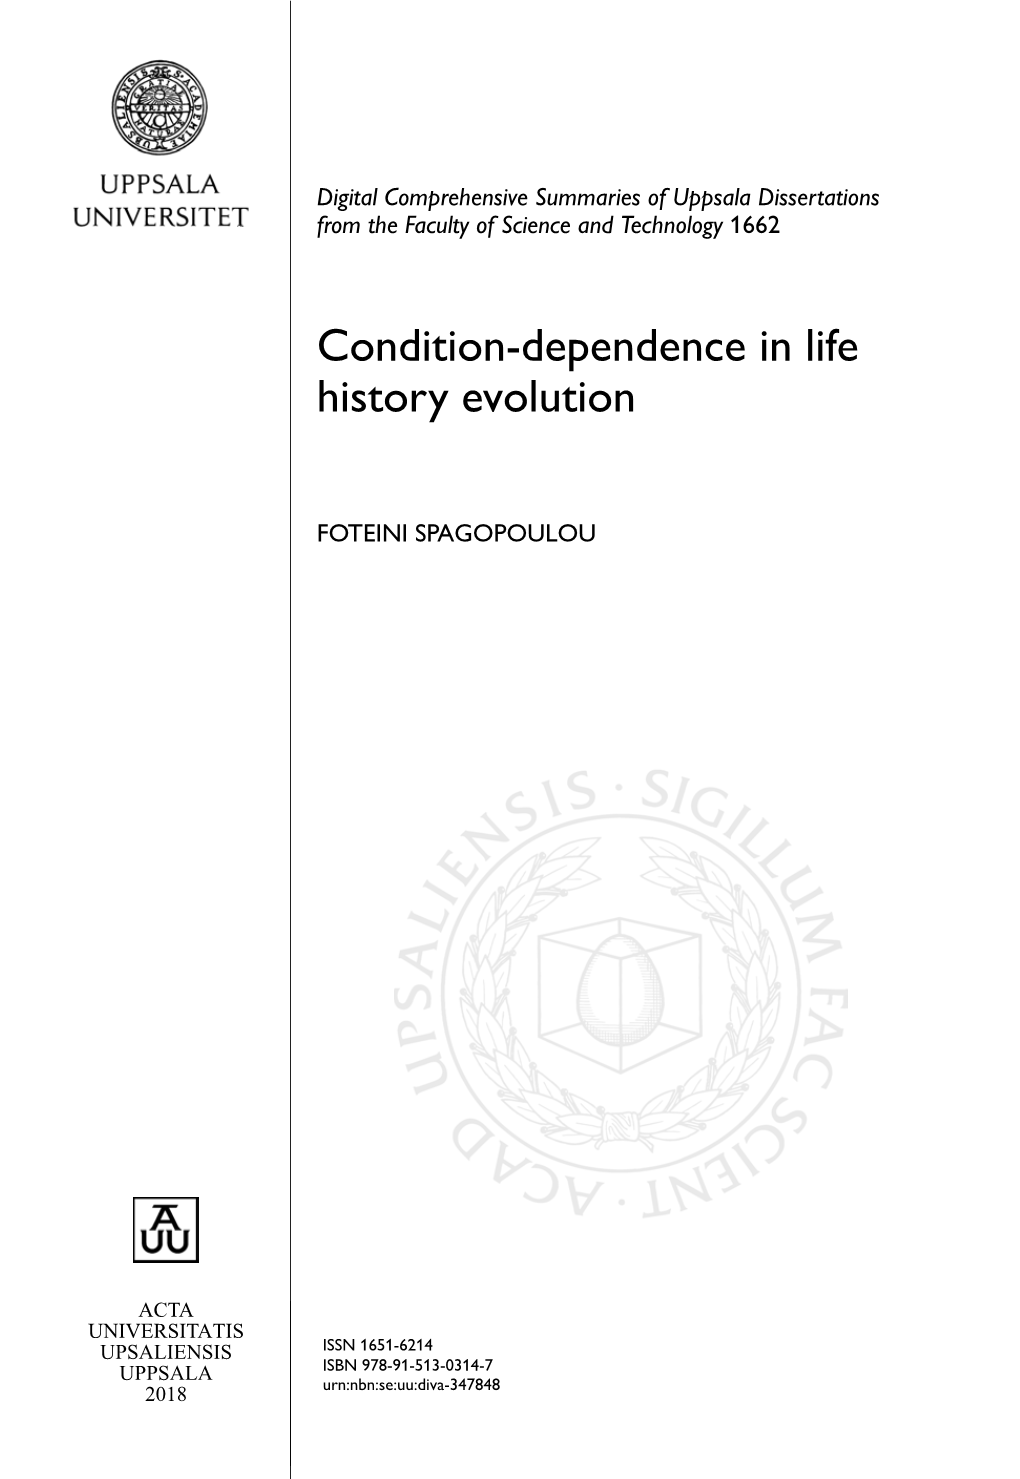 Condition-Dependence in Life History Evolution